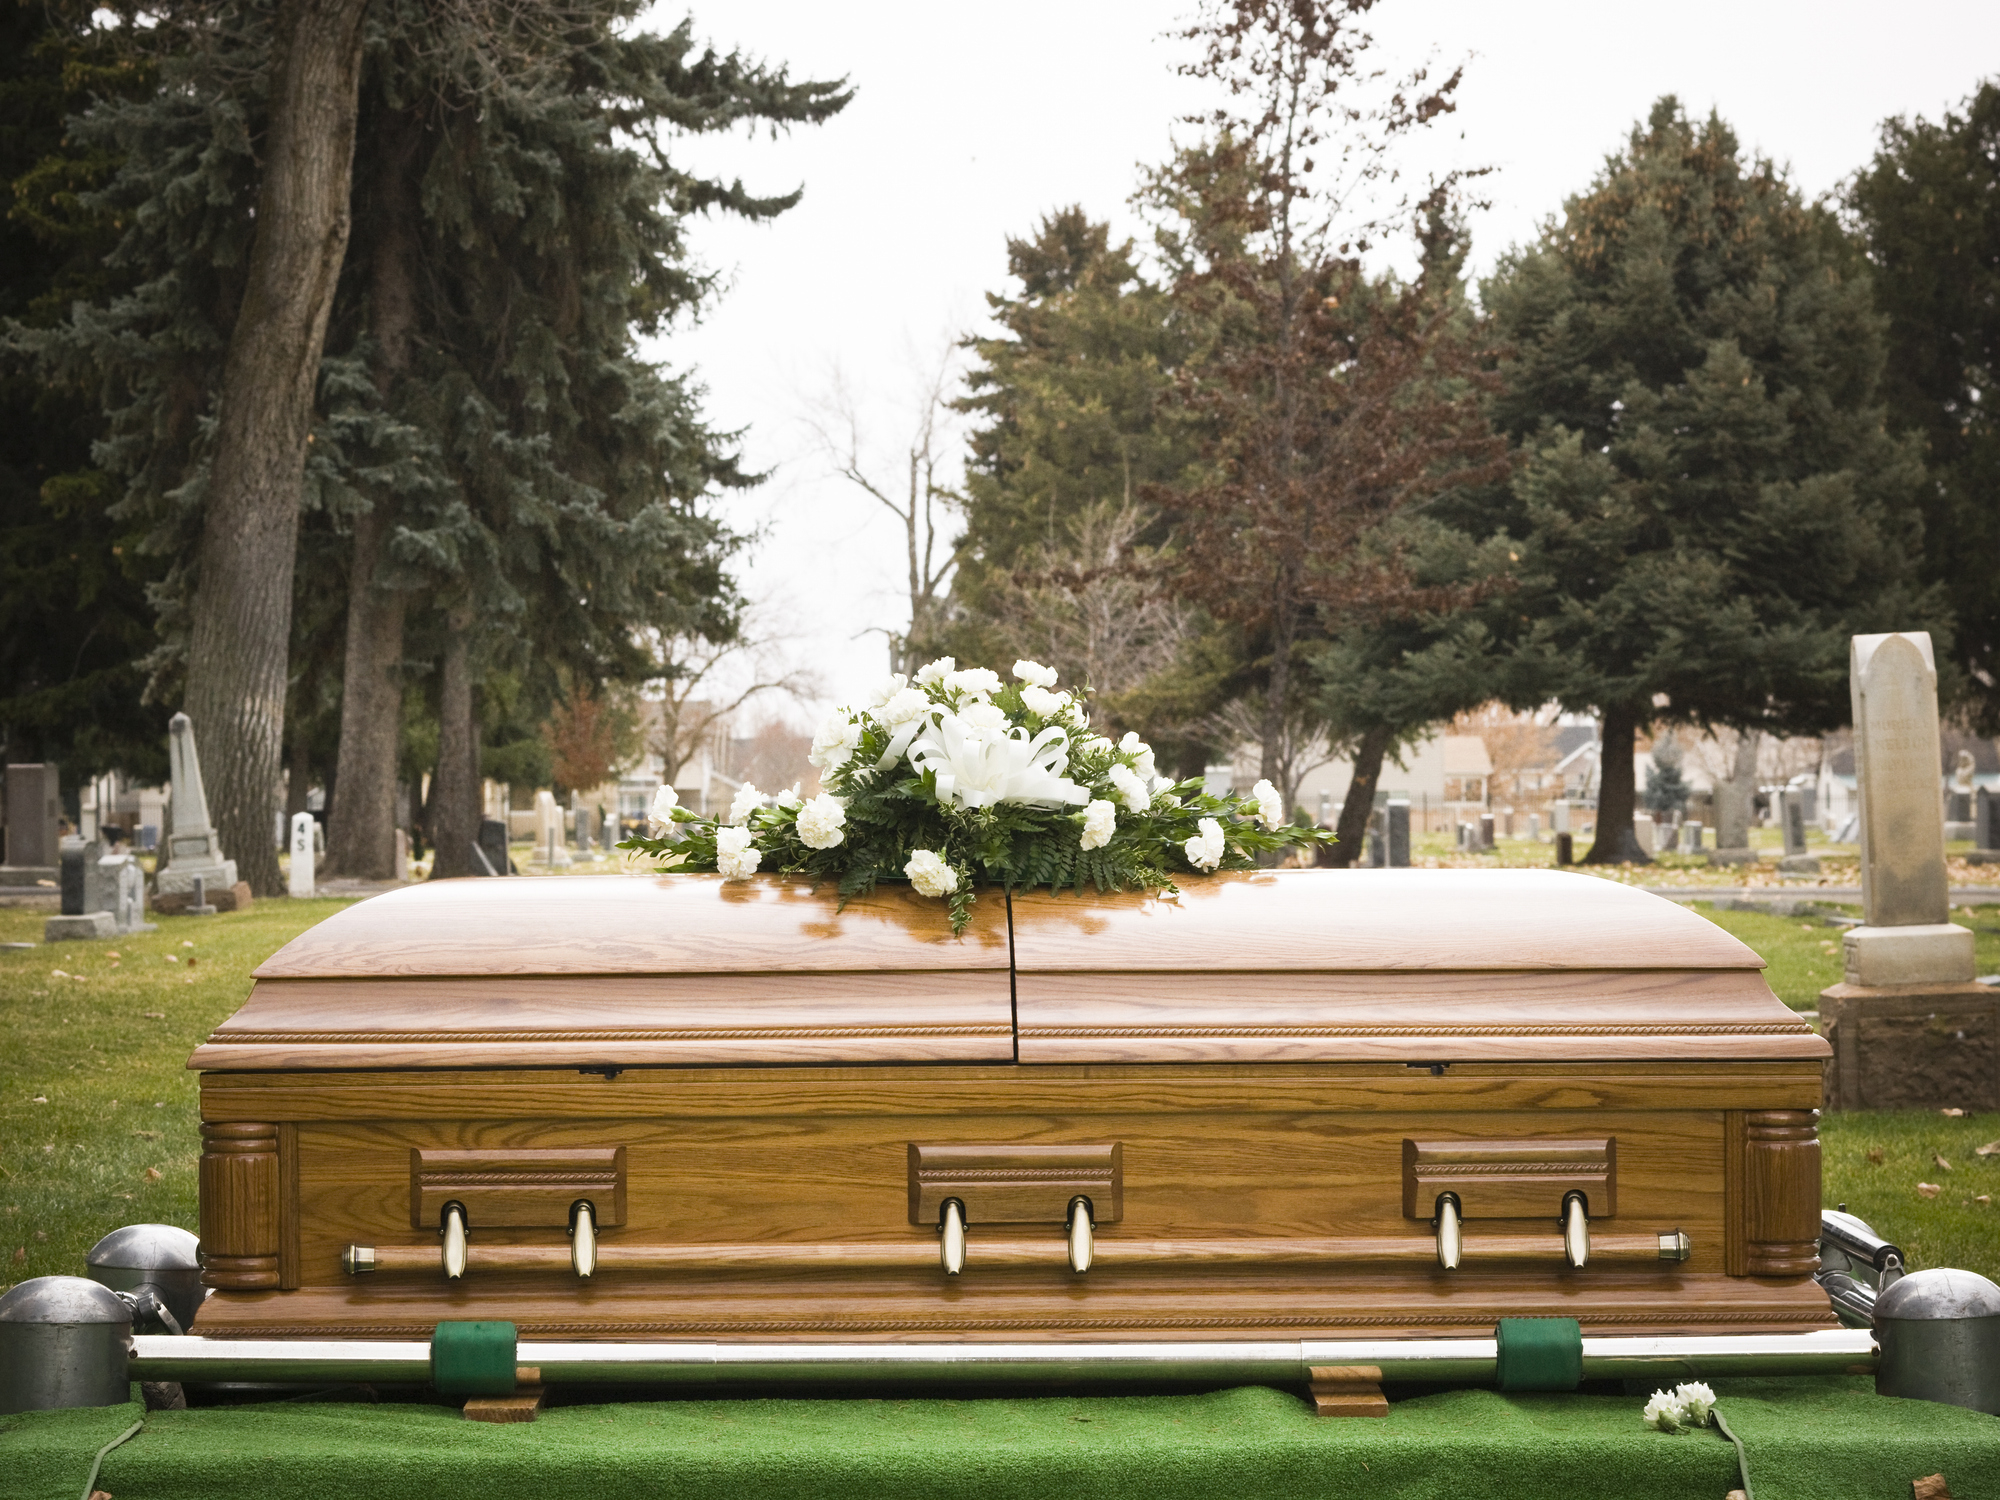 Wooden casket with white flowers on top at a cemetery setting